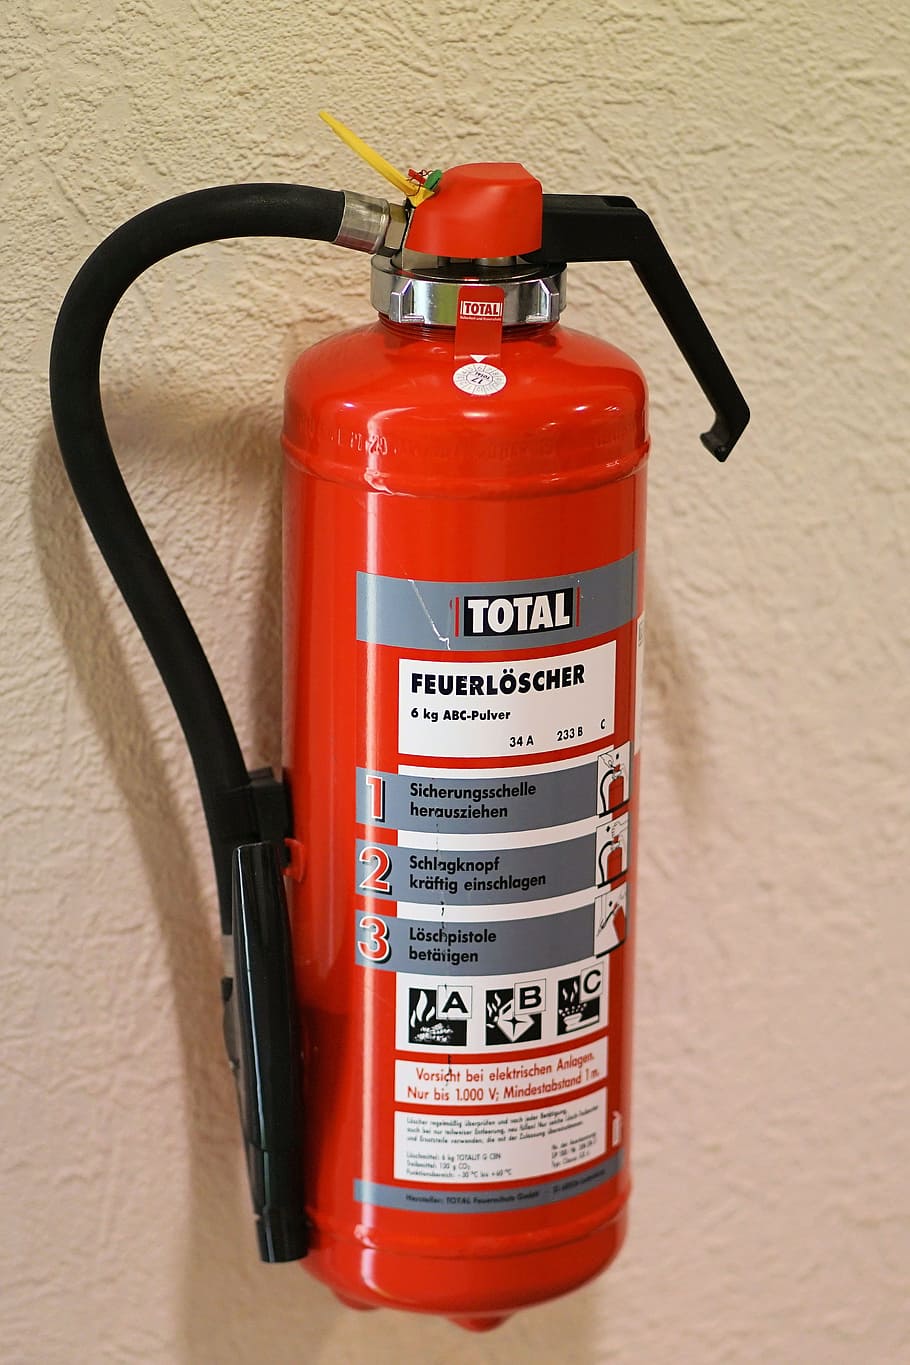 fire extinguisher, risk, natural gas, emergency, fuel, security, first aid, rescue, help, burn